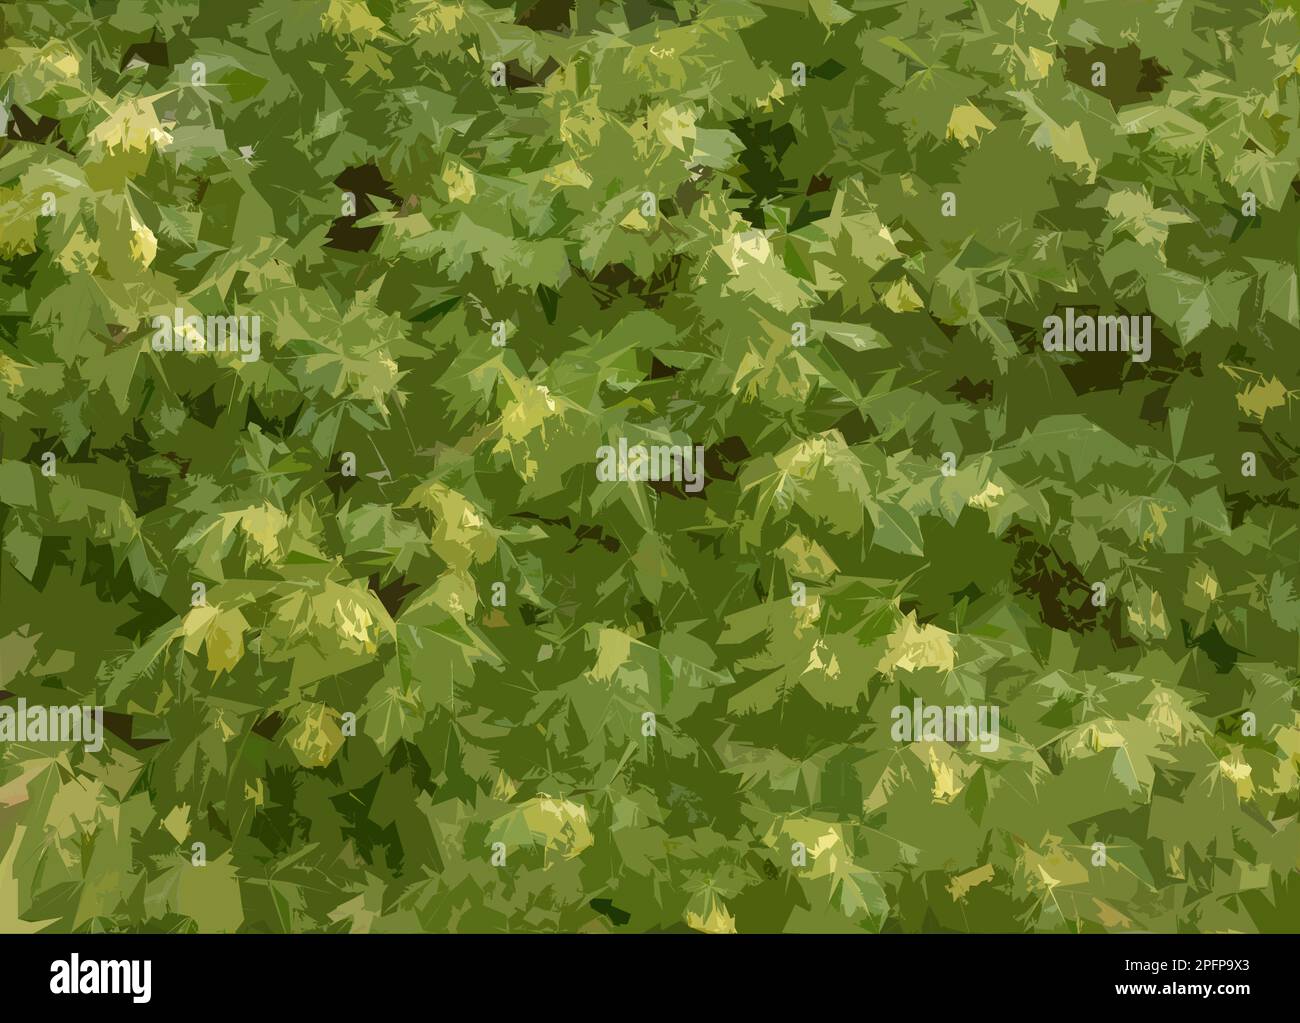 Closeup illustration of the garden tree Ptelea trifoliata or  hoptree seen with leaves and flowers. Stock Photo